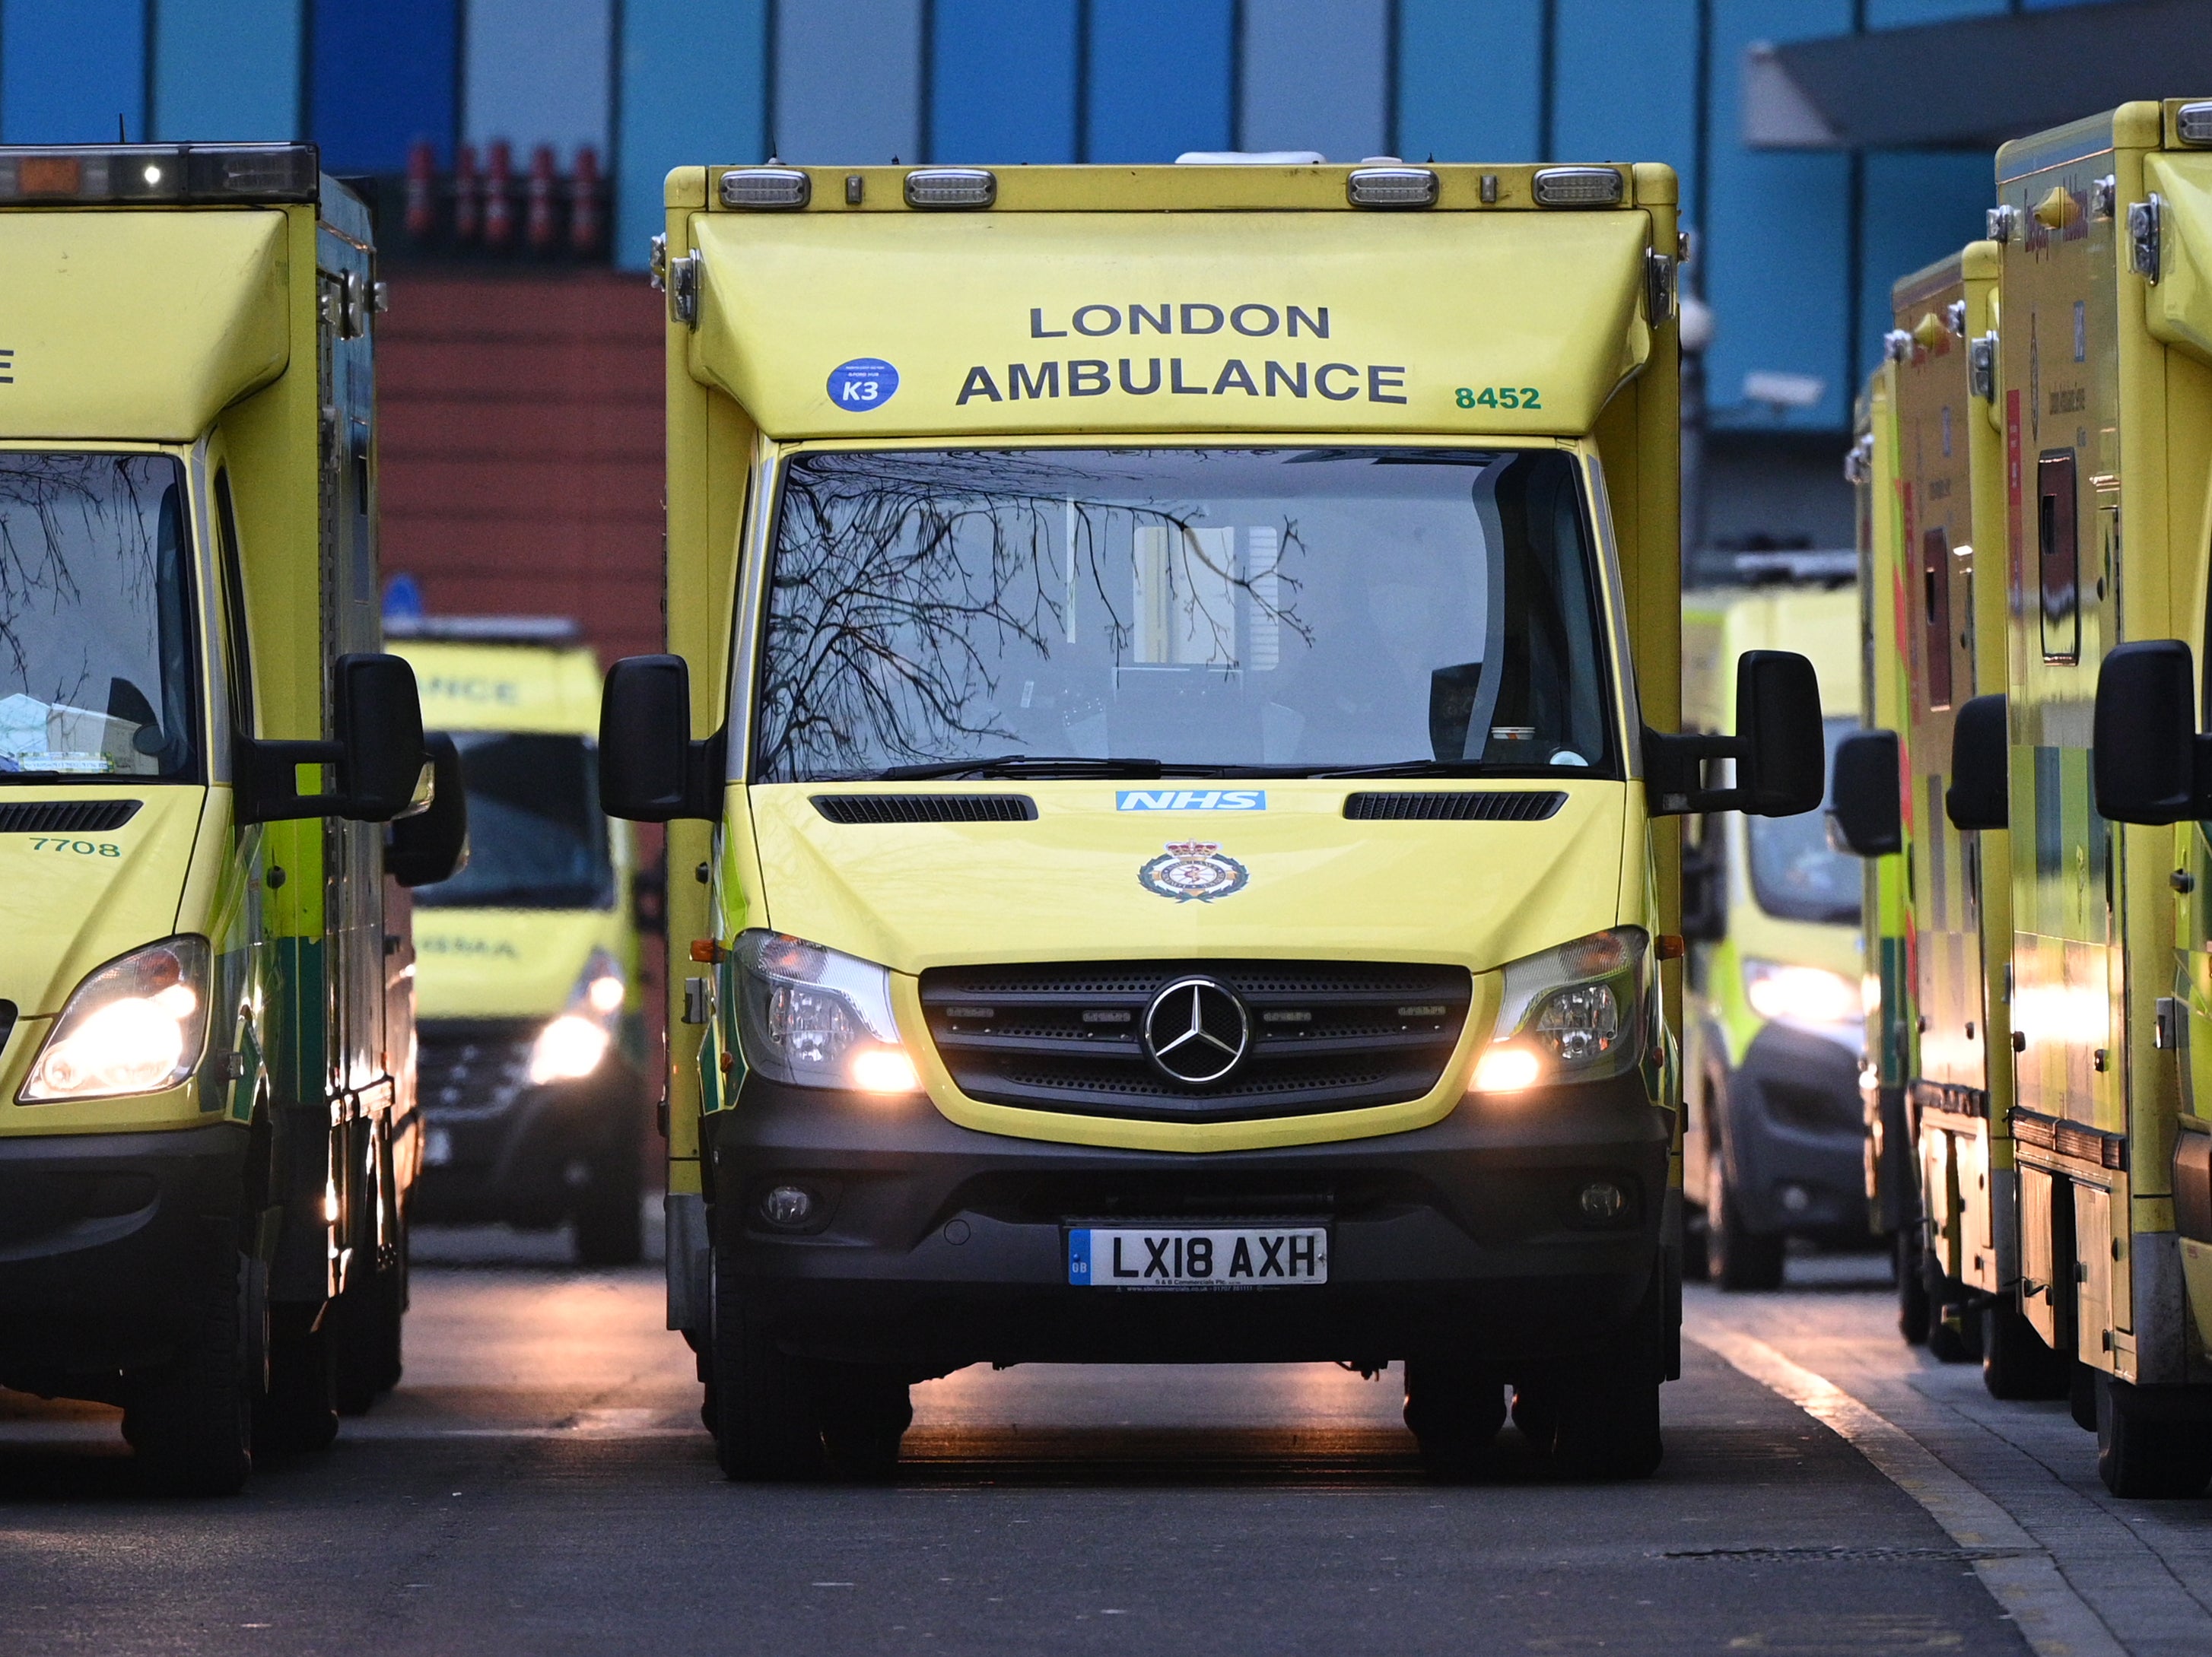 London ambulance service declared a ‘business continuity incident’ on Monday evening, meaning there was a risk of normal services being disrupted below an acceptable level